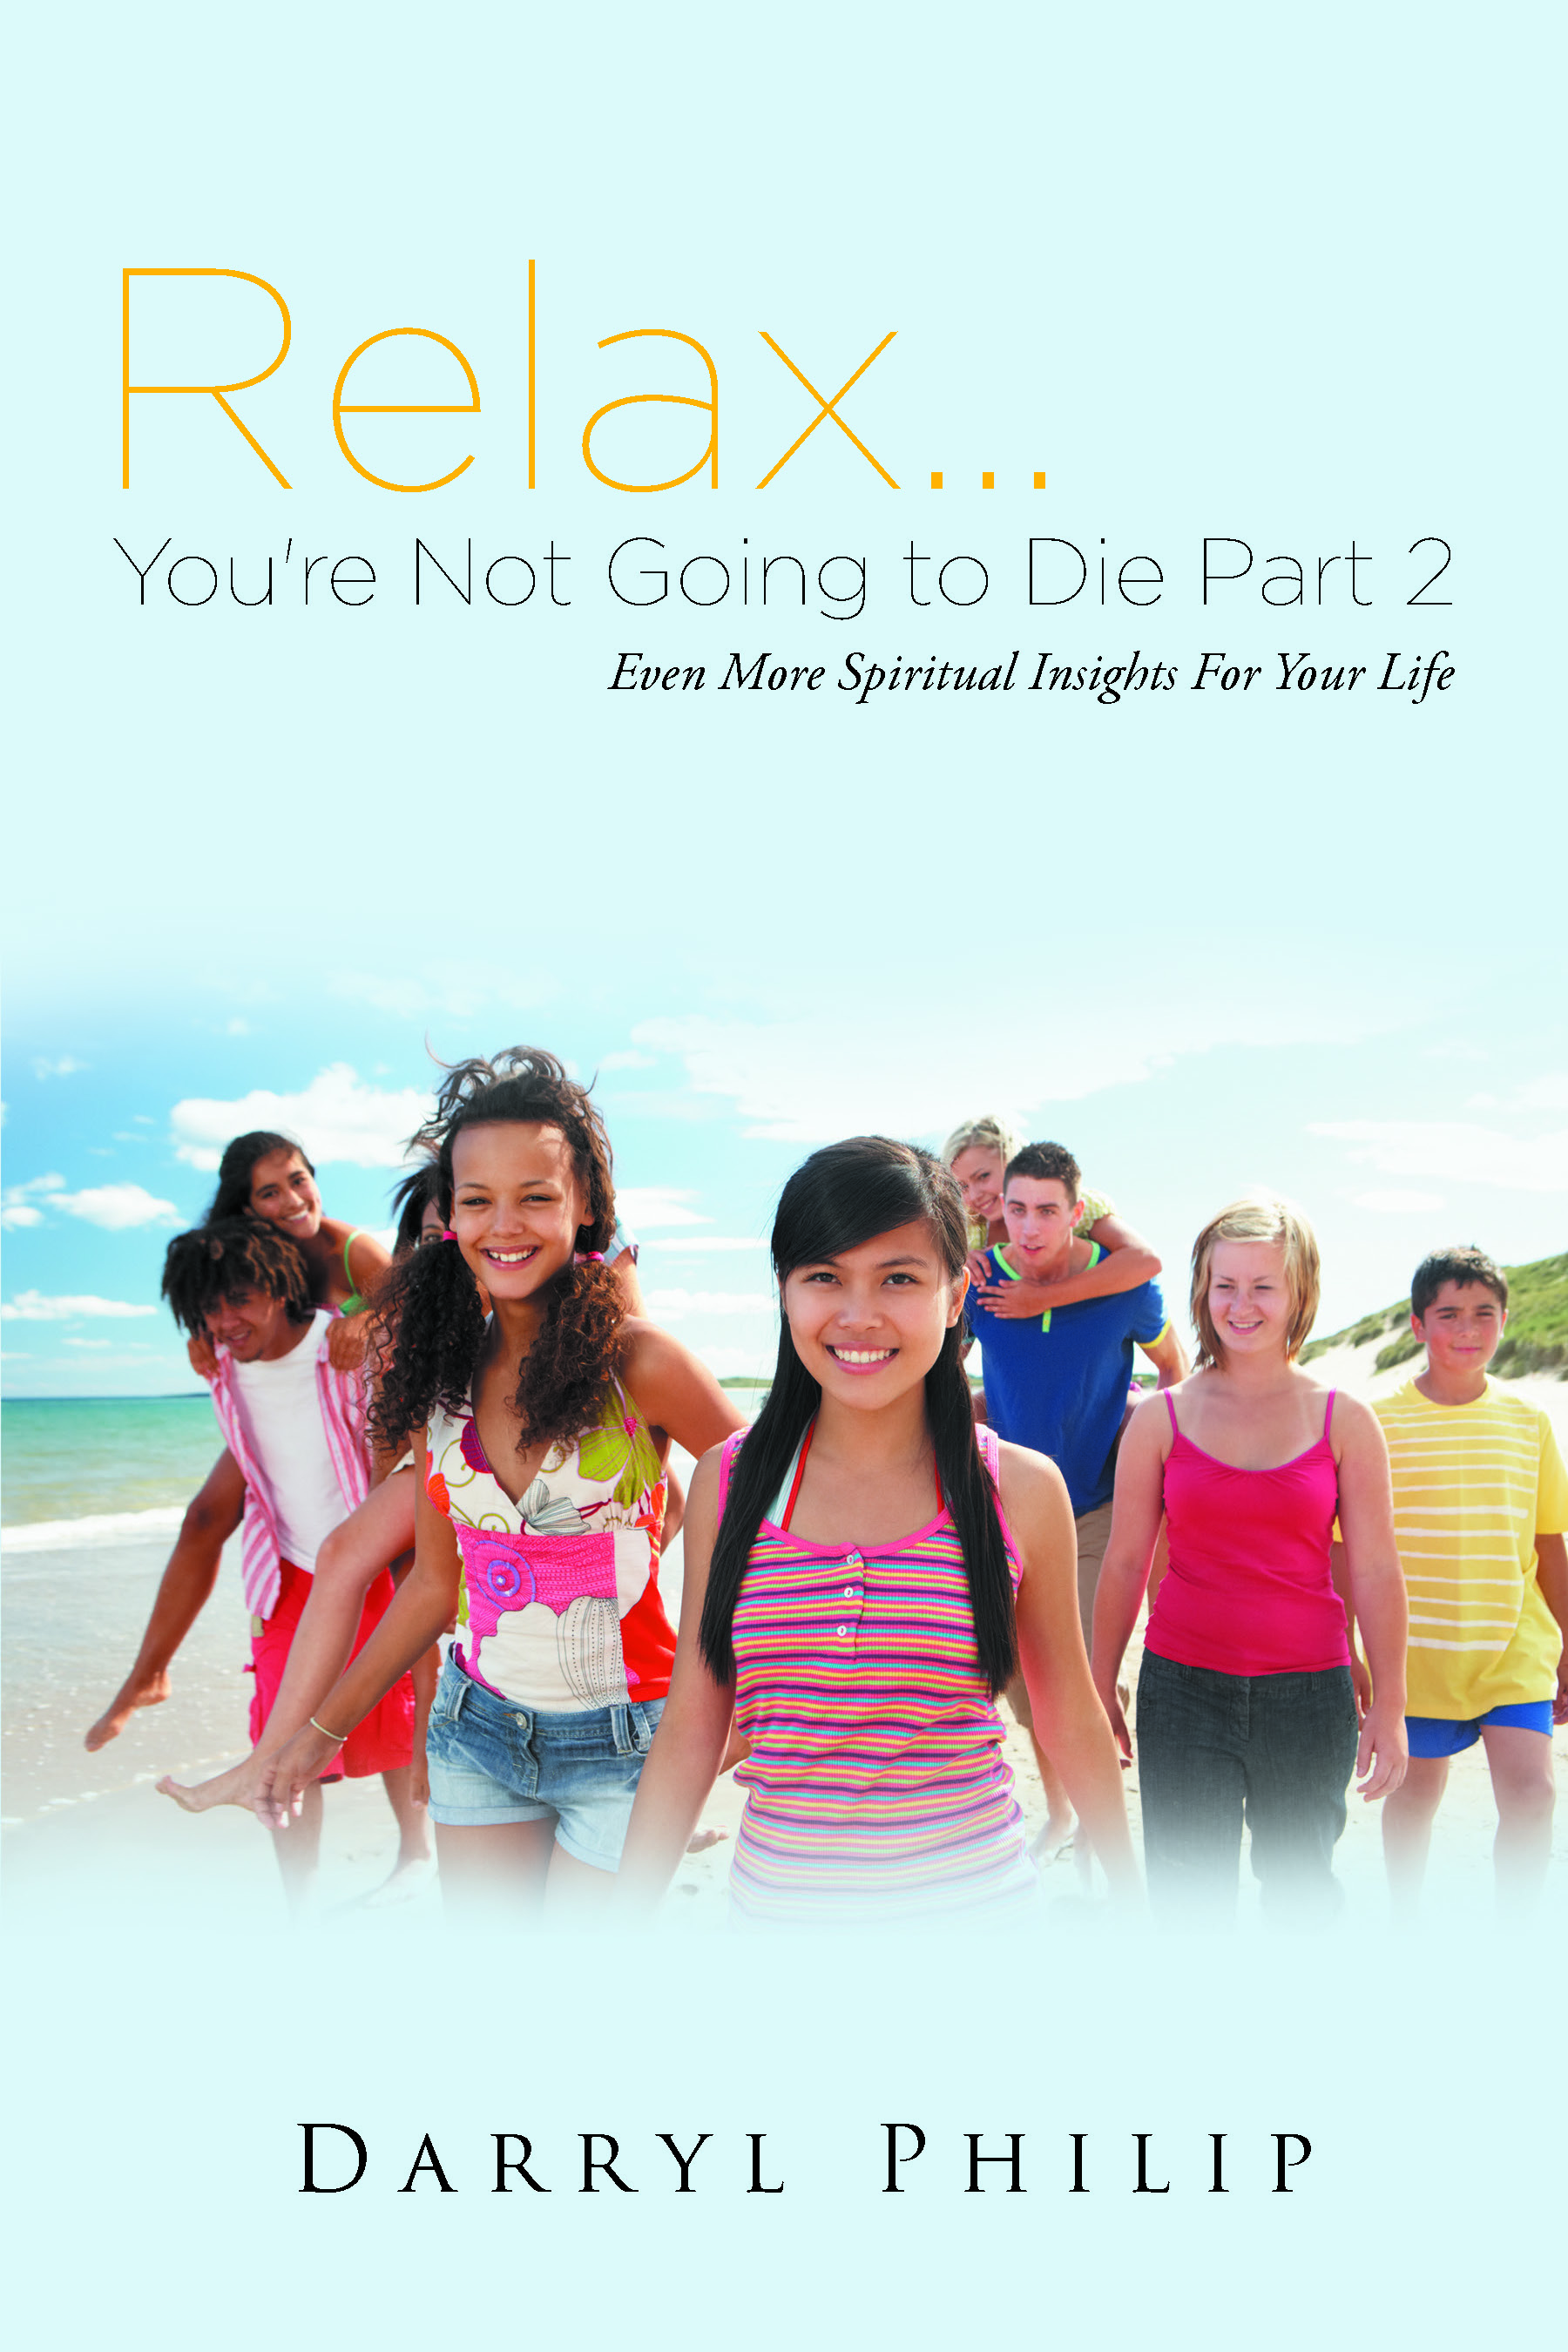 Author Darryl Philip’s New Book, "Relax. . . You’re Not Going to Die Part 2: Even More Spiritual Insights for Your Life," Presents Updated Knowledge of God’s Plan